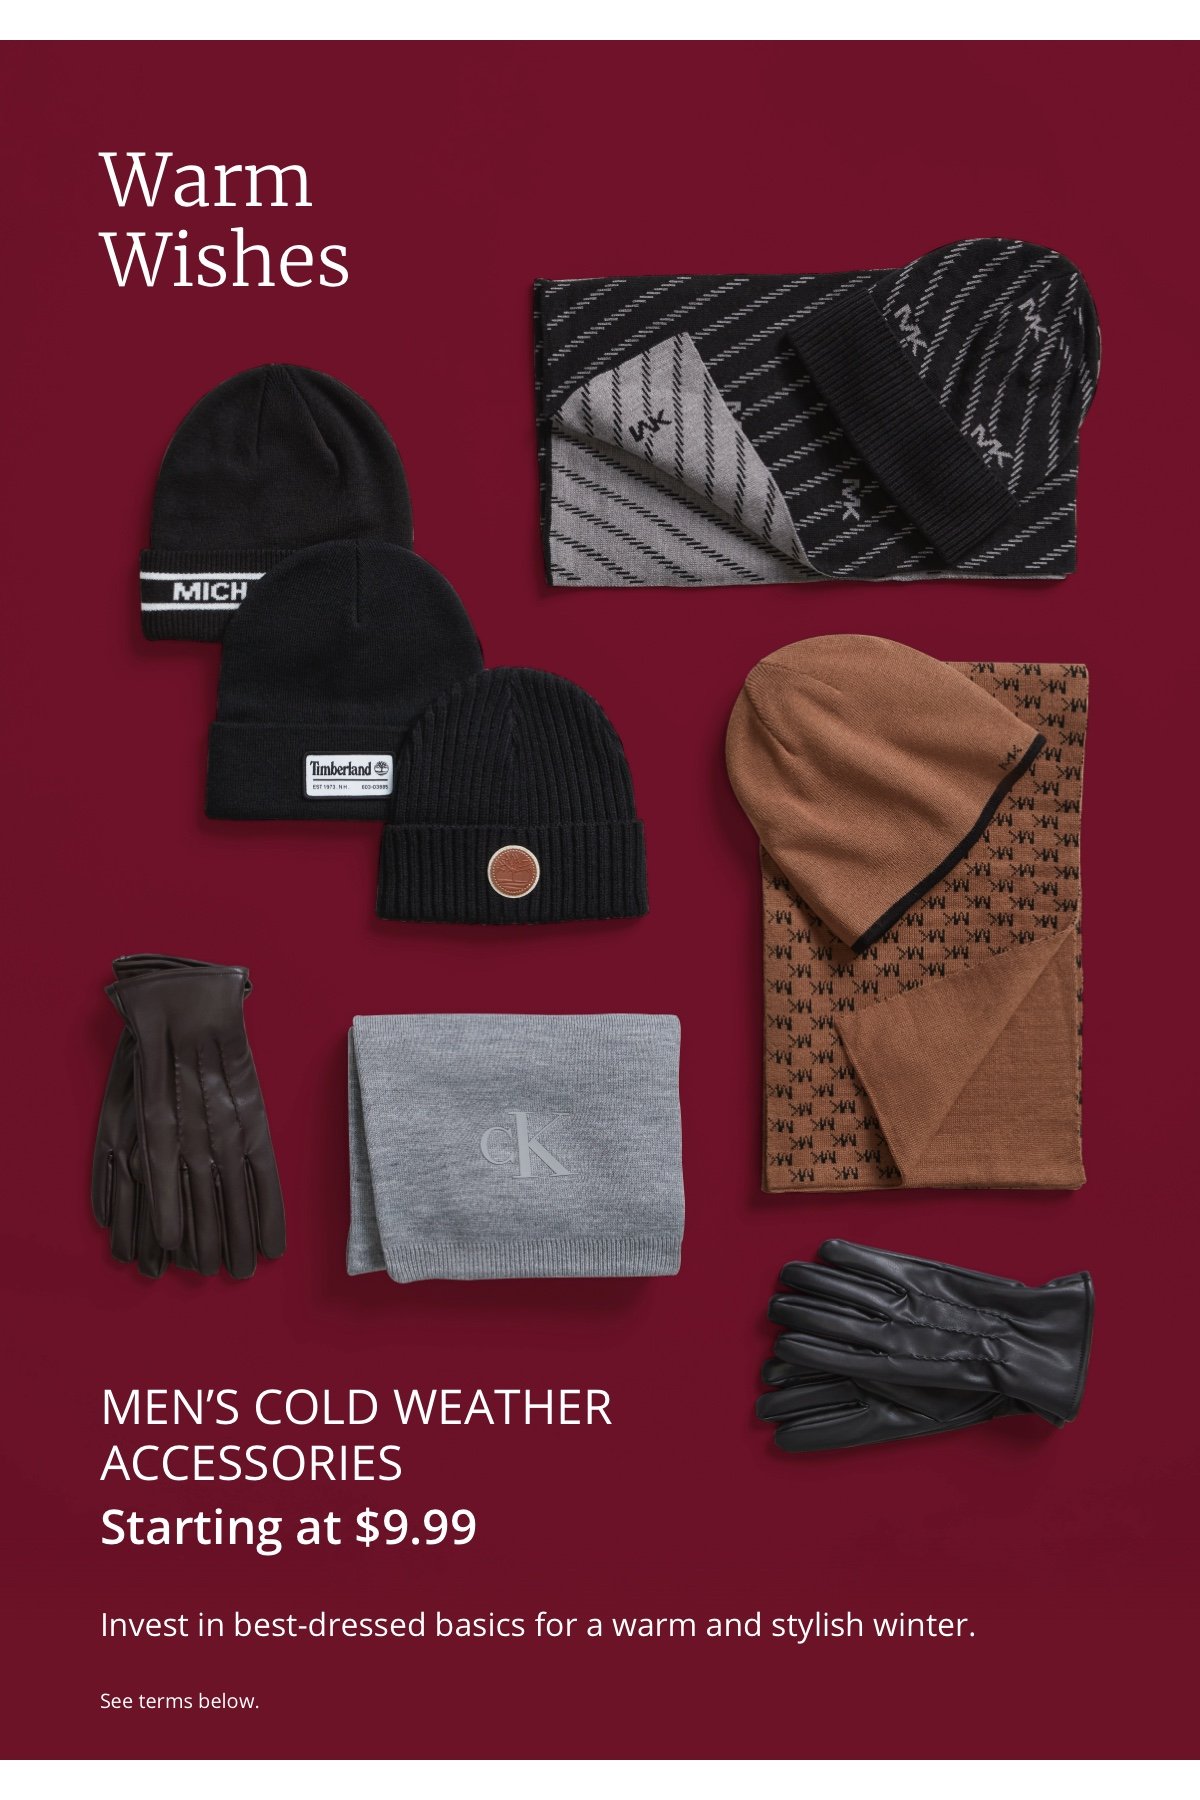 Warm Wishes | Men s Cold Weather Accessories starting at \\$9.99 | Invest in best-dressed basics for a warm and stylish winter. See terms below.